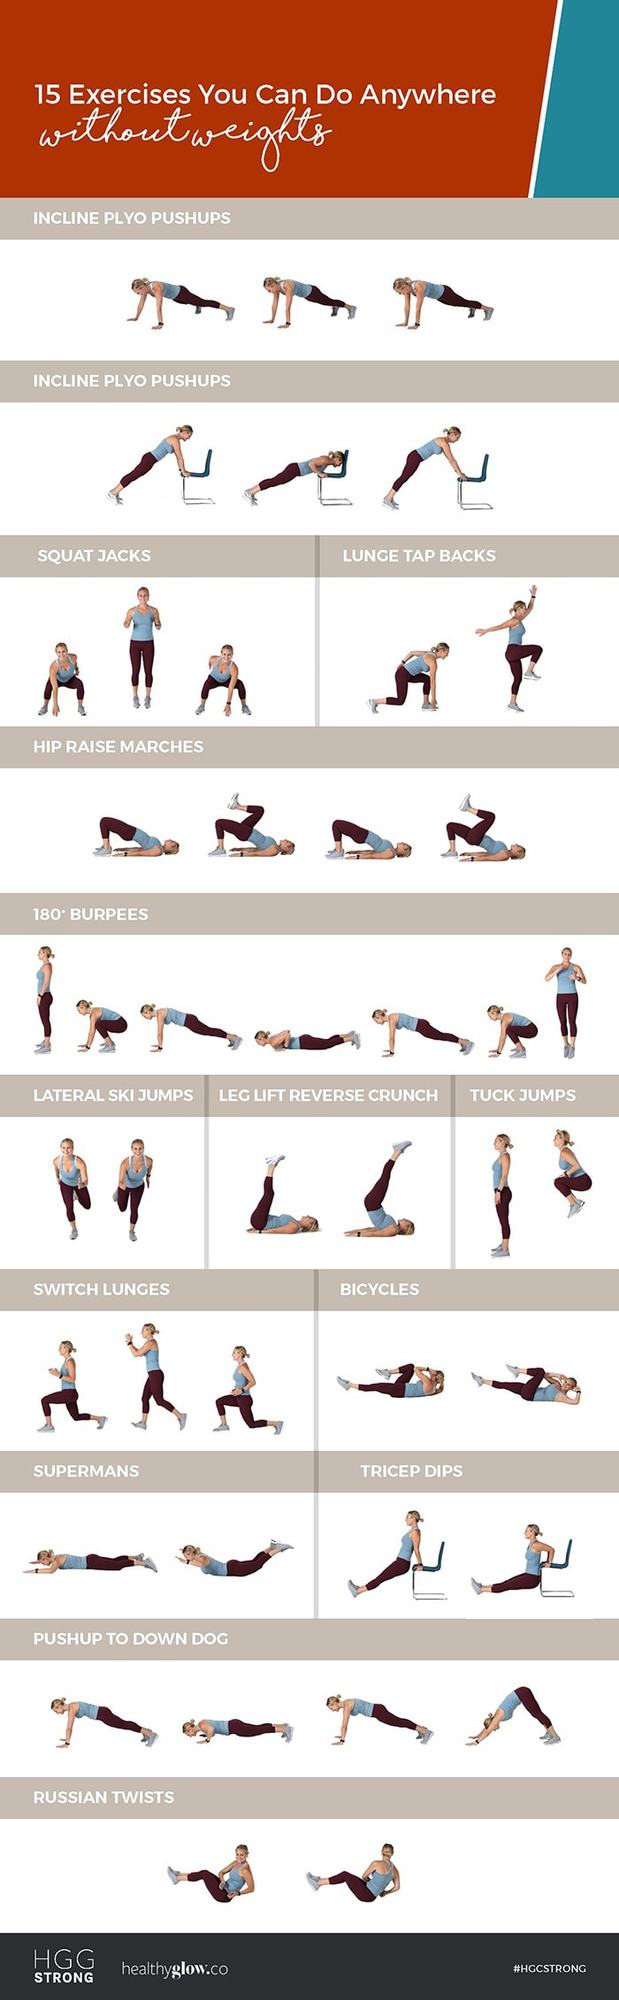 Take your workout anywhere with these 15 strength-based bodyweight exercises! These moves use only your bodyweight and are from Healthy Glow Co's new HGG STRONG program!